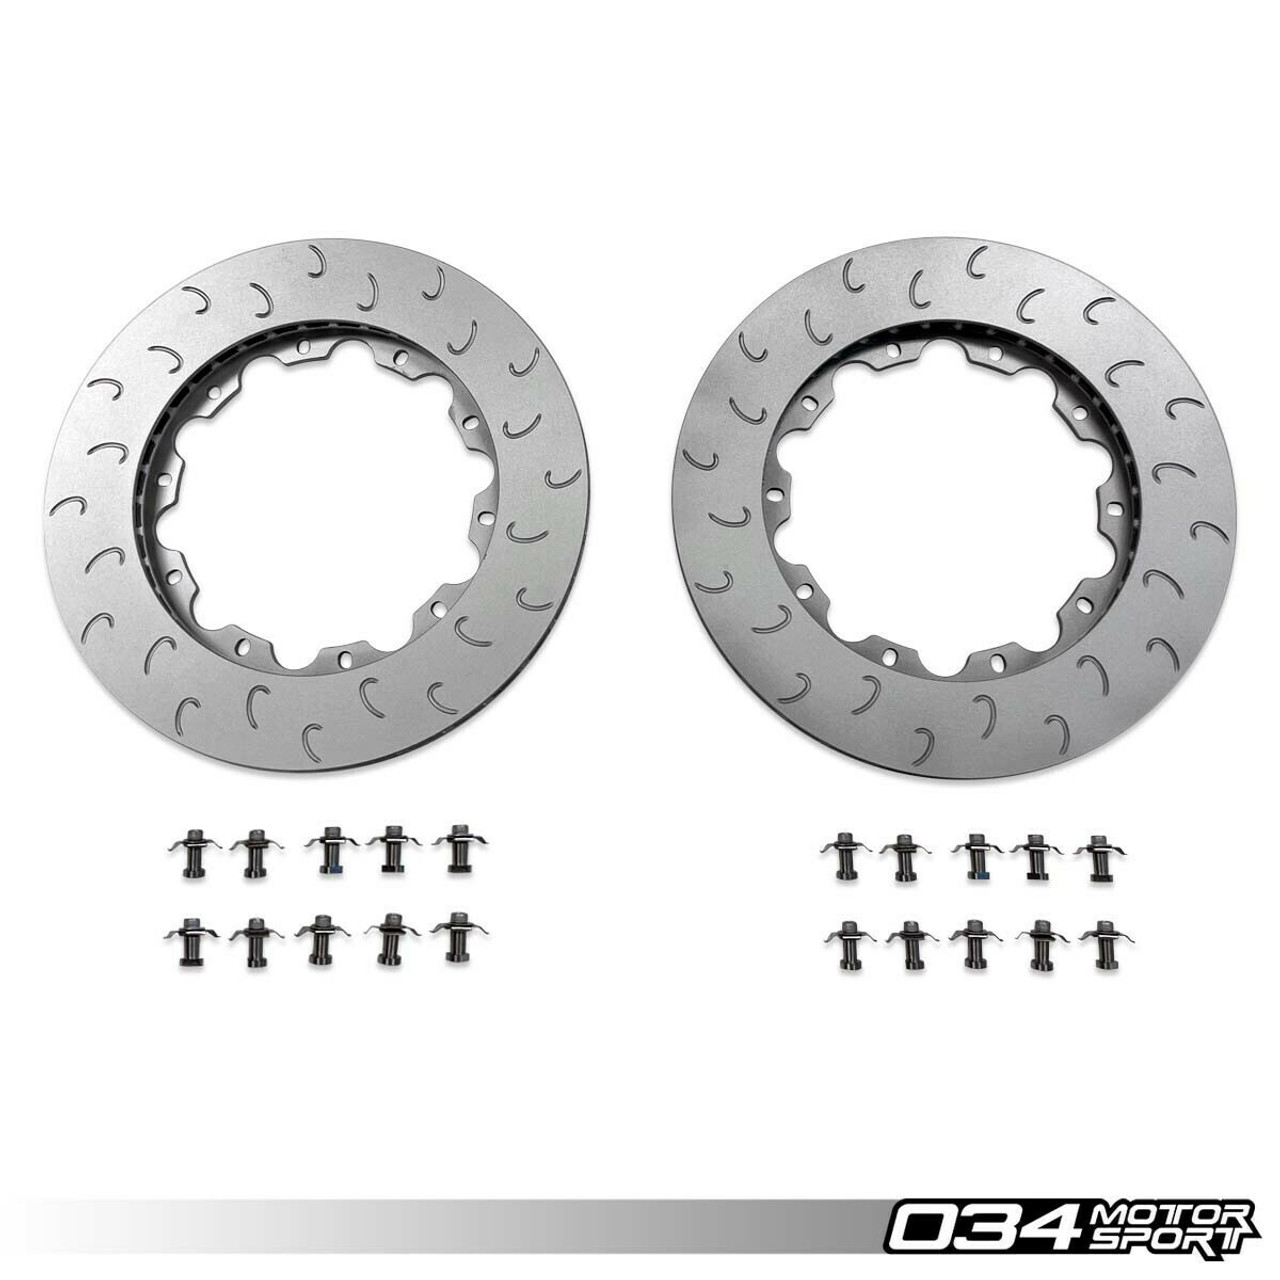 034Motorsport Replacement Front Rotor Ring Set for B9/B9.5 S4, S5 & SQ5